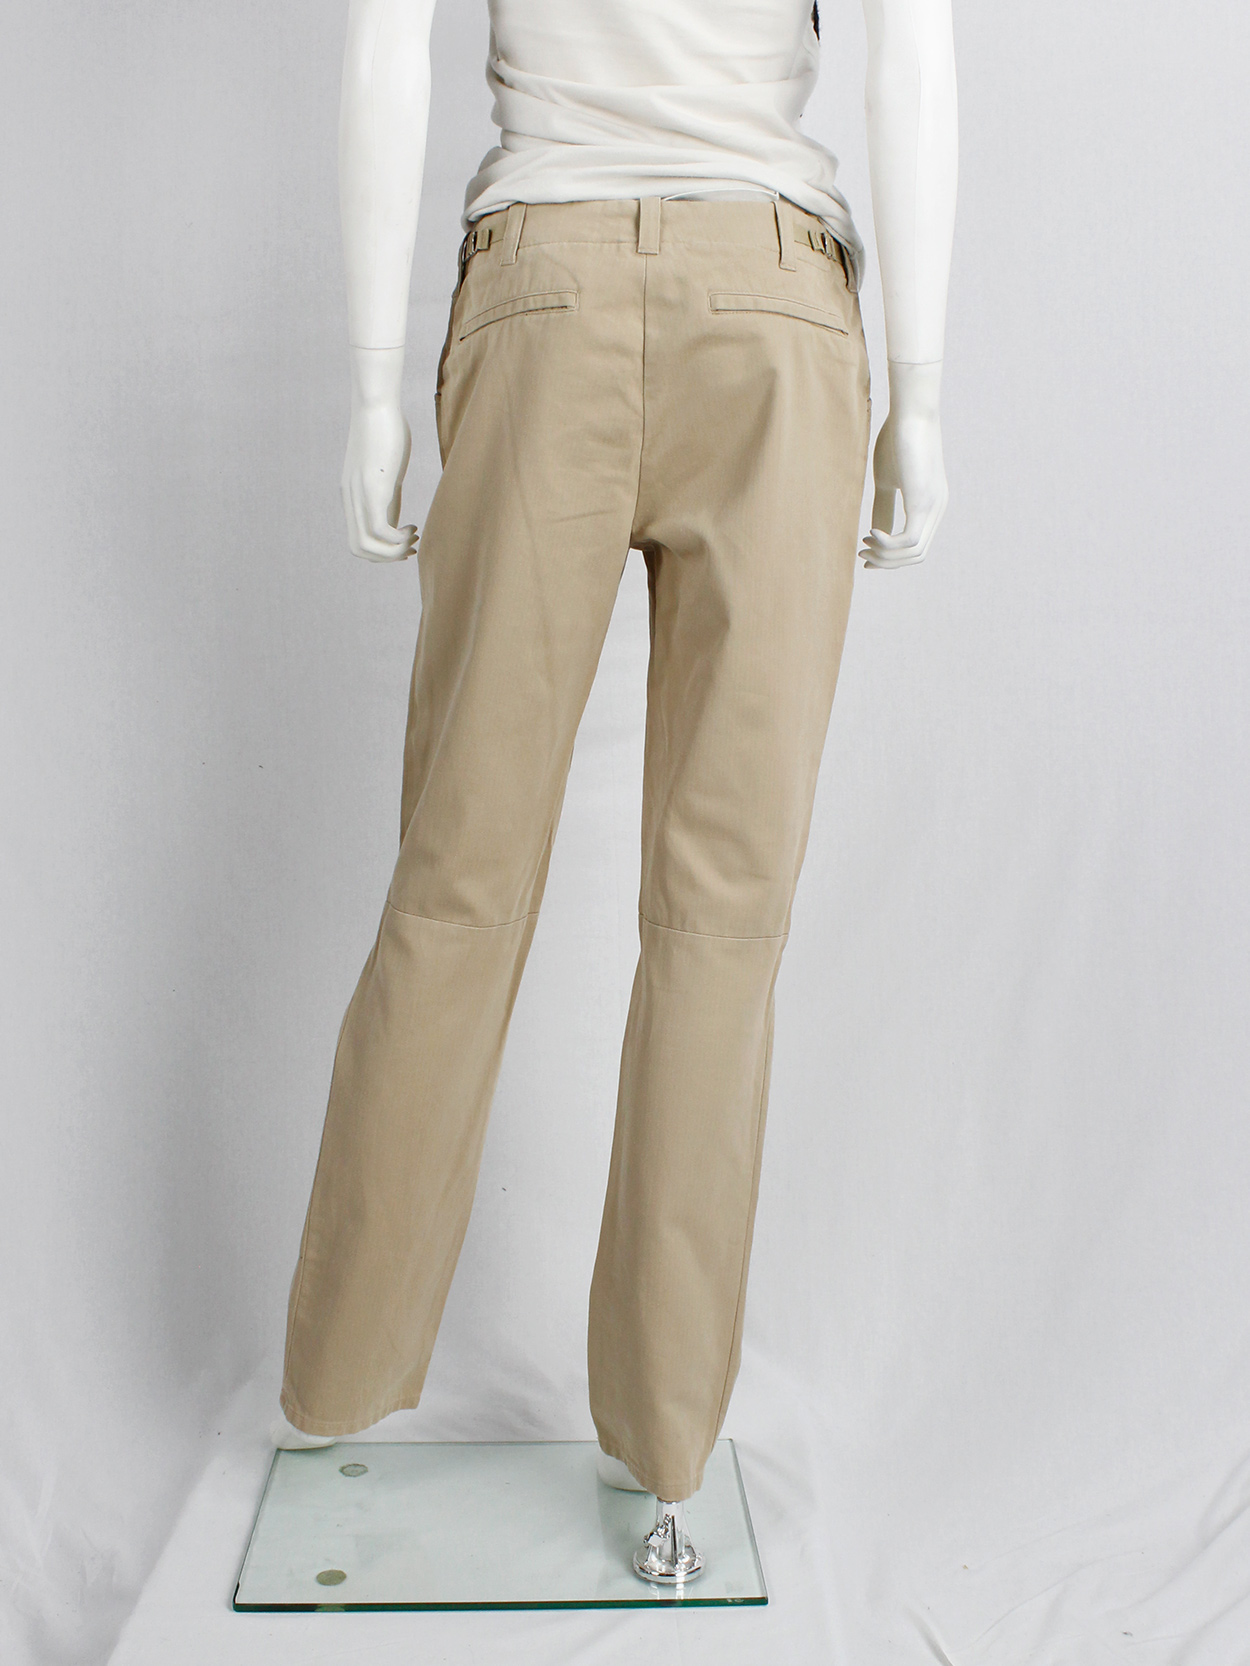 Helmut Lang beige trousers with elastic bands at the knees 1990s 90s (11)